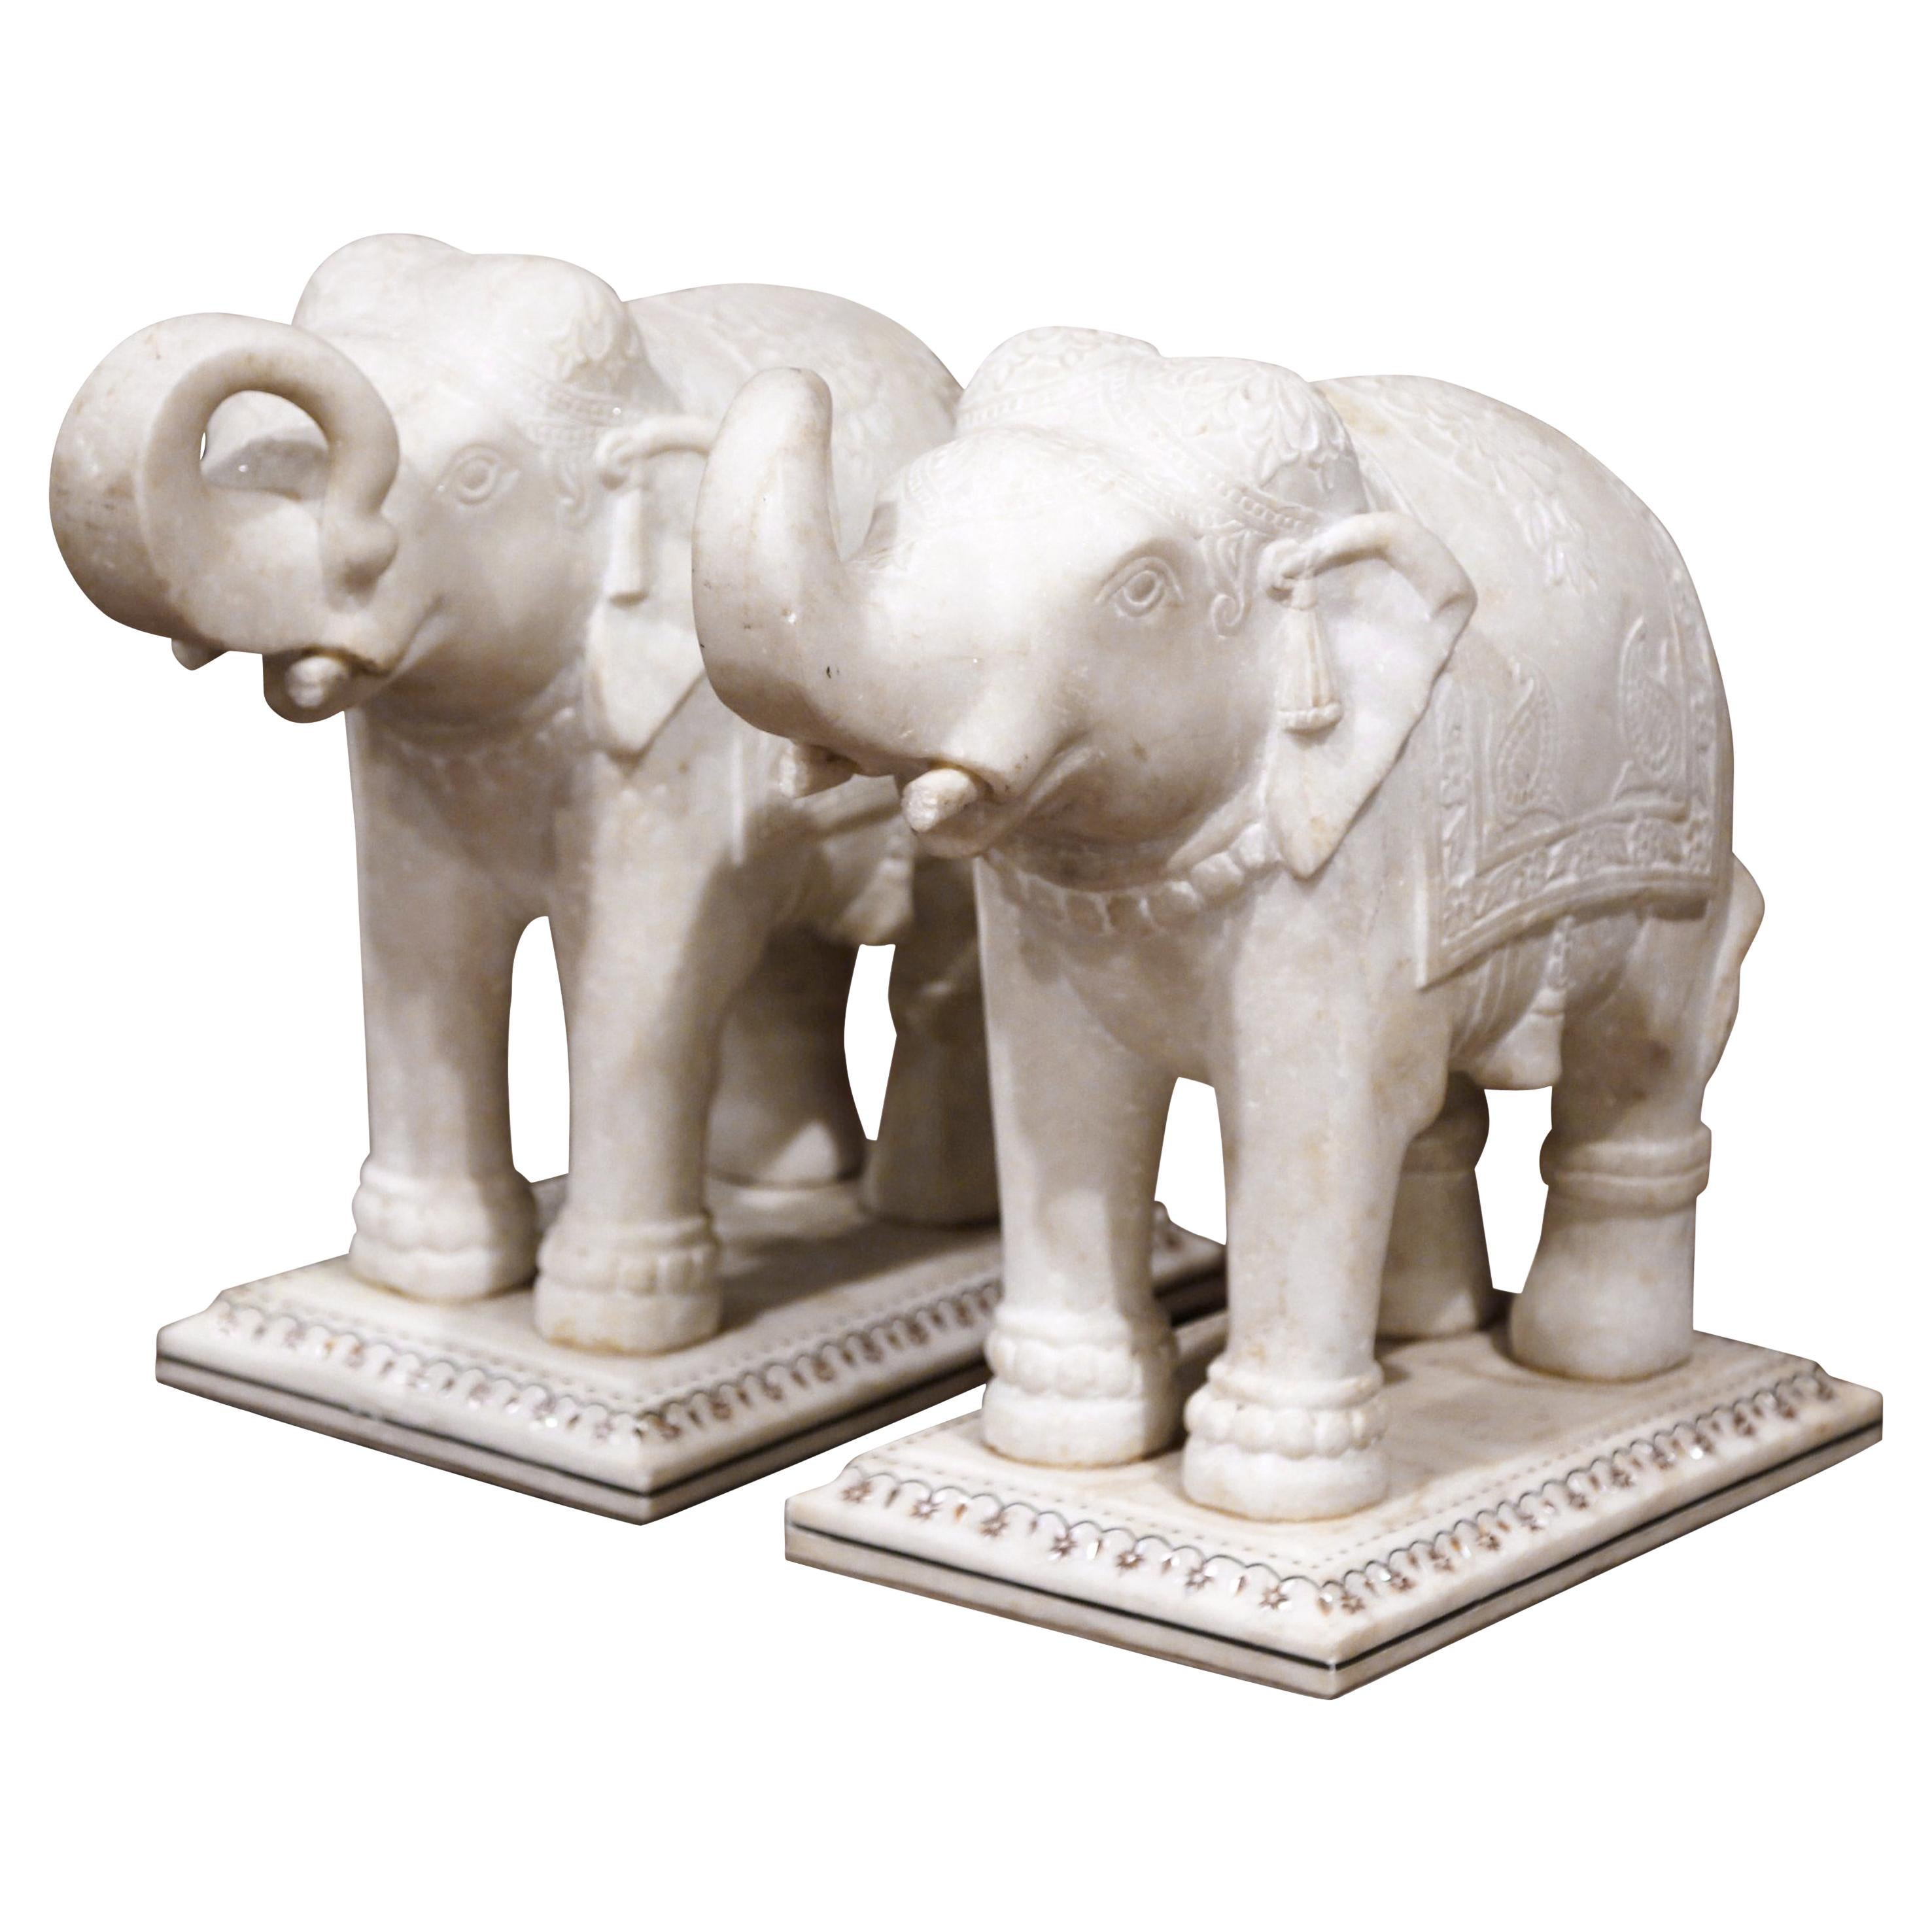 Pair of 19th Century English Carved White Marble Elephants Sculptures